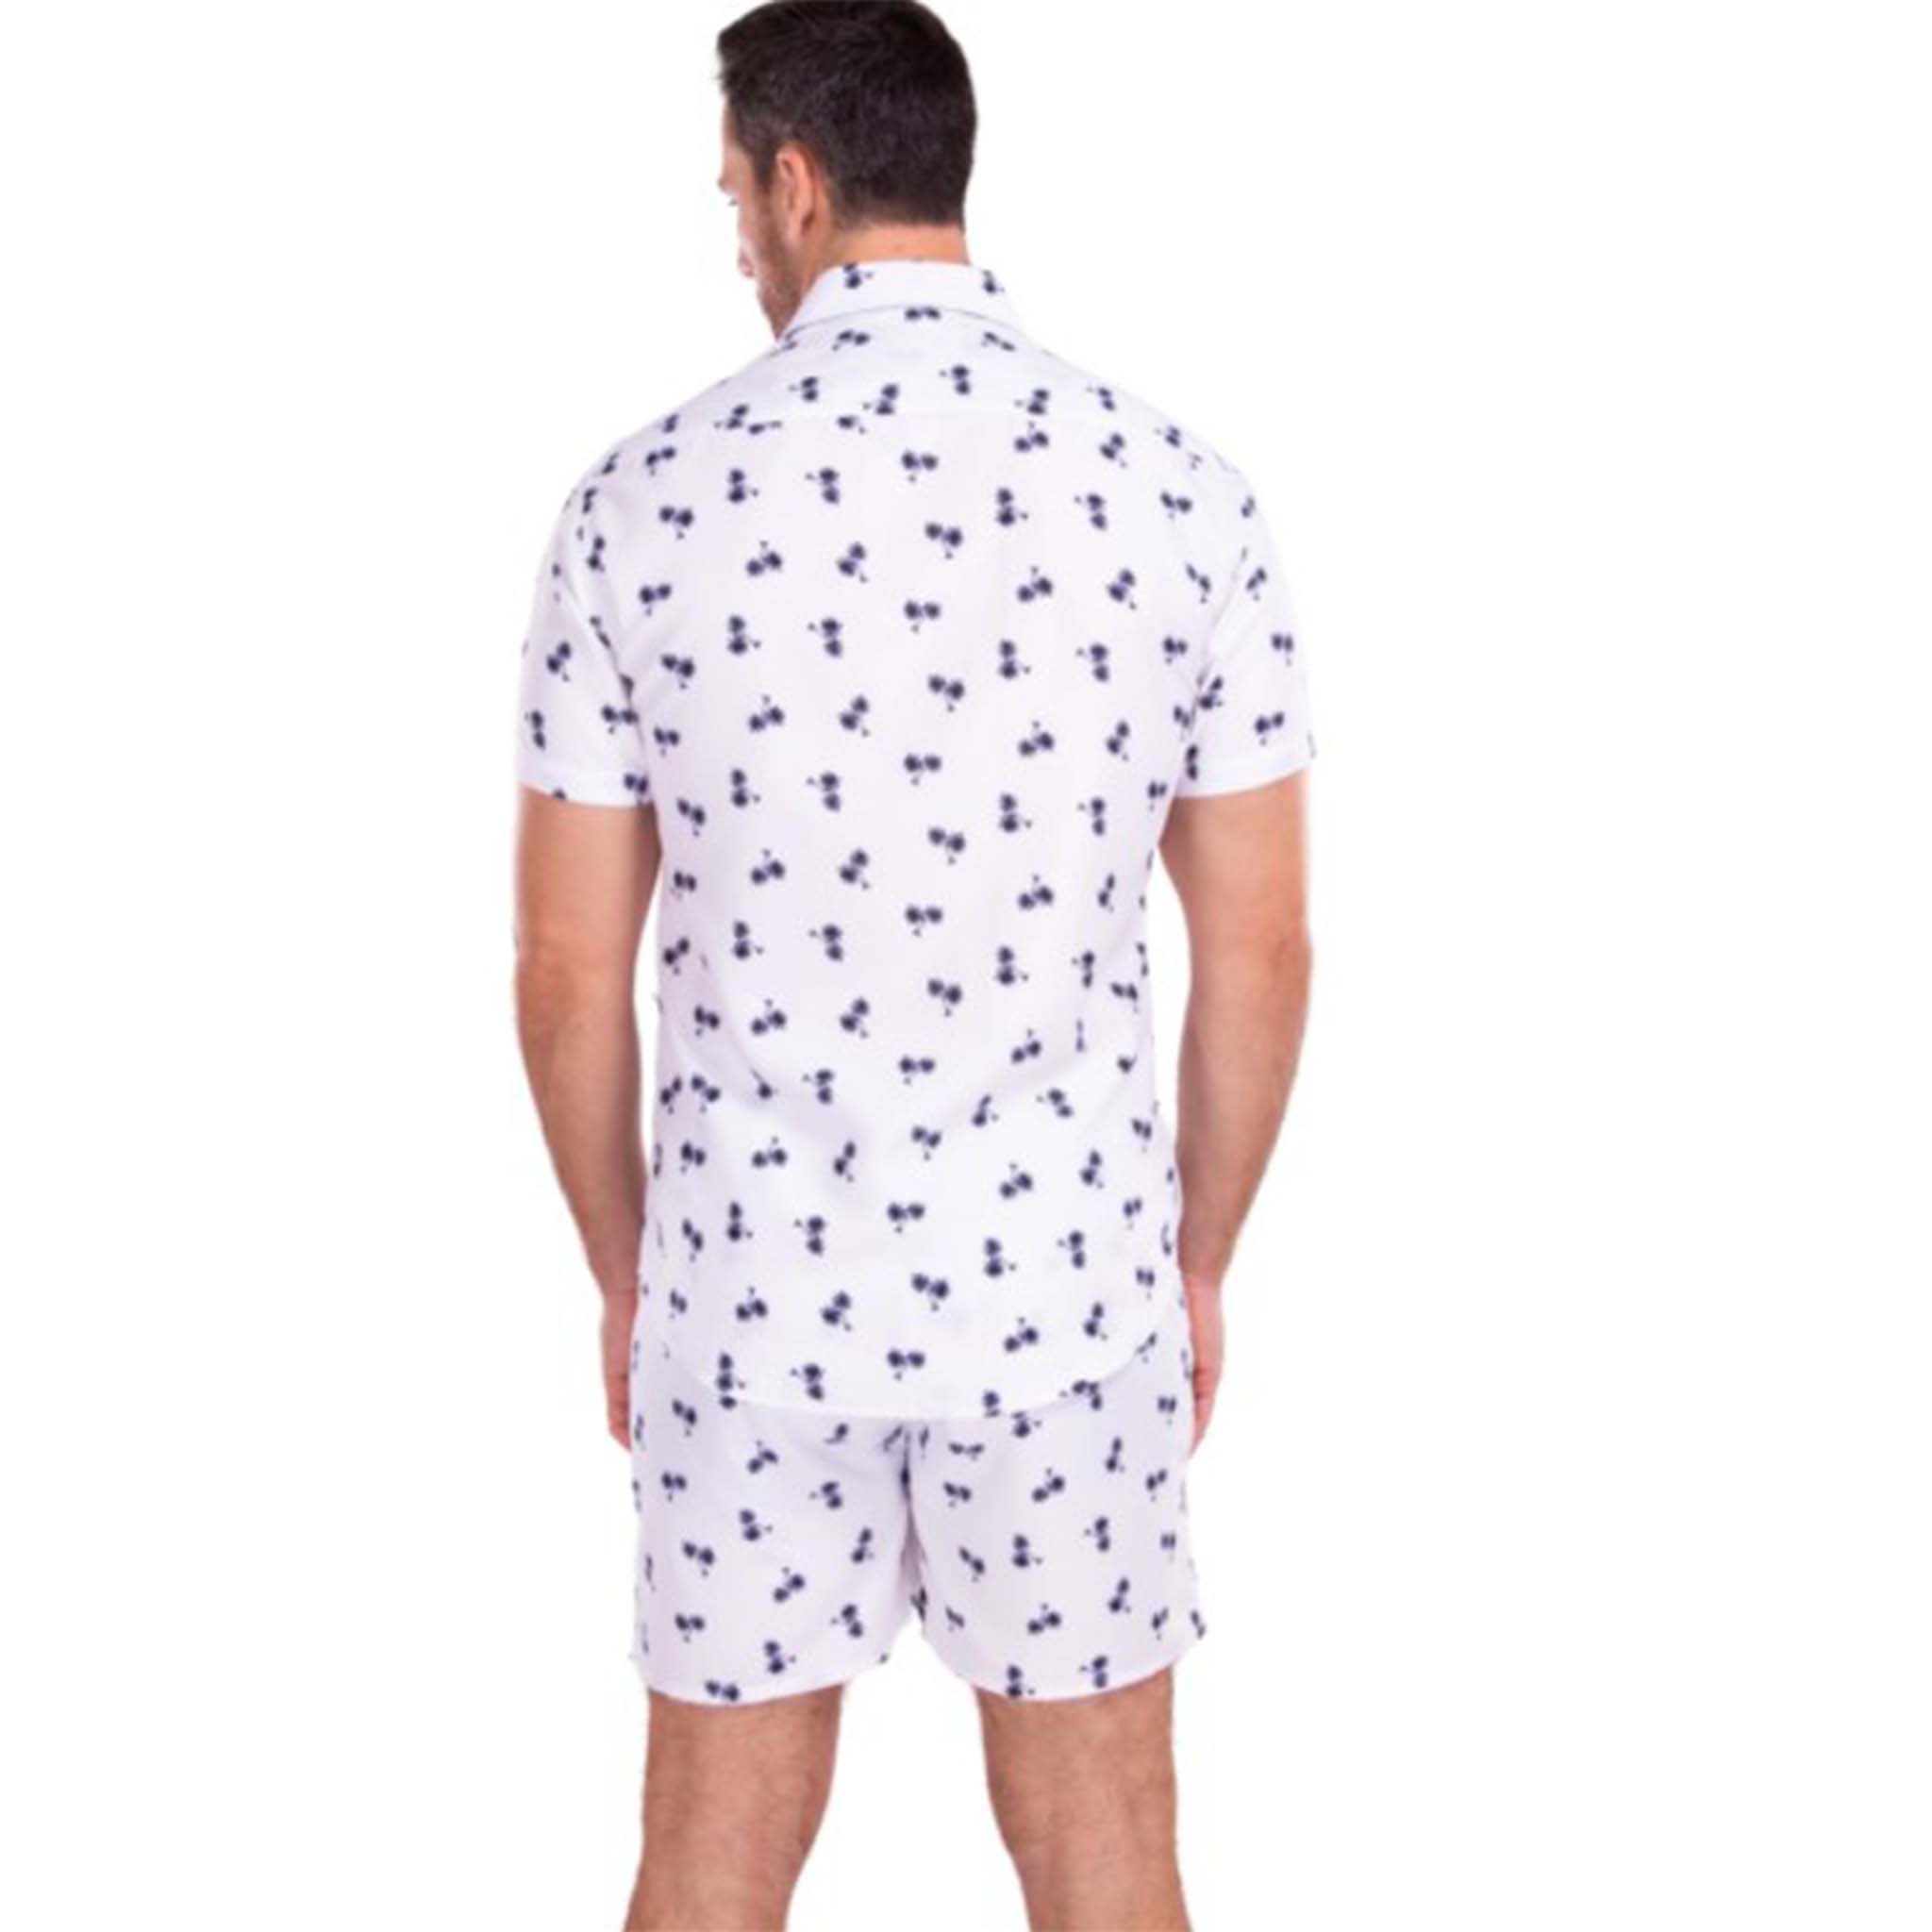 Stay Cool and Trendy with the White Tropical Print Short Set at DNK Mobile